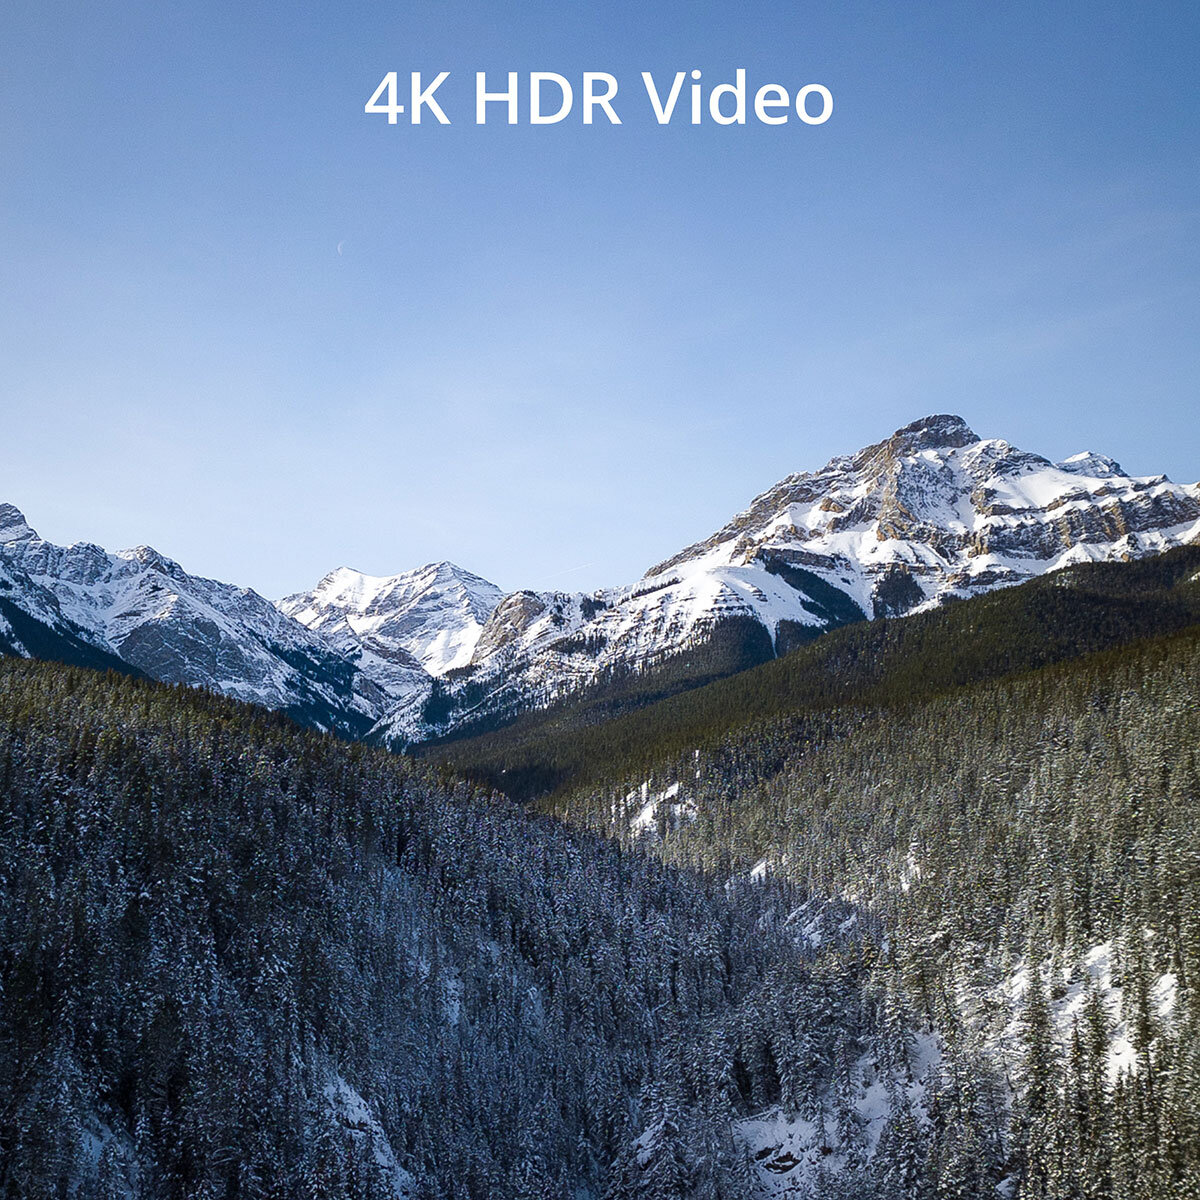 Landscape picture emphasising the drones 4K HDR video abilities